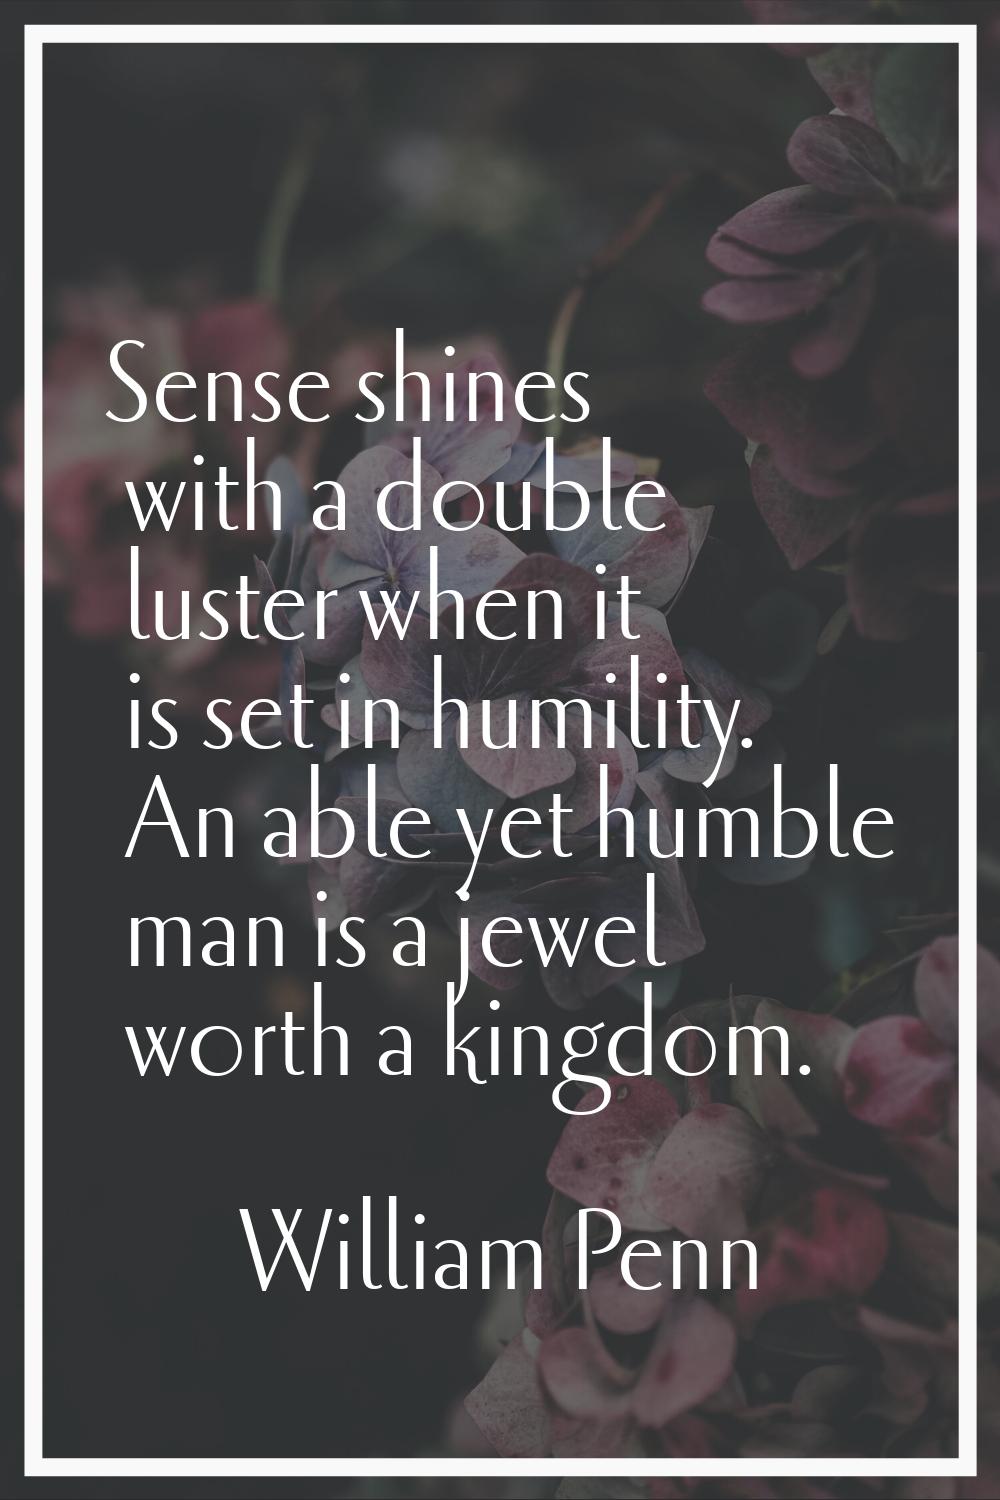 Sense shines with a double luster when it is set in humility. An able yet humble man is a jewel wor